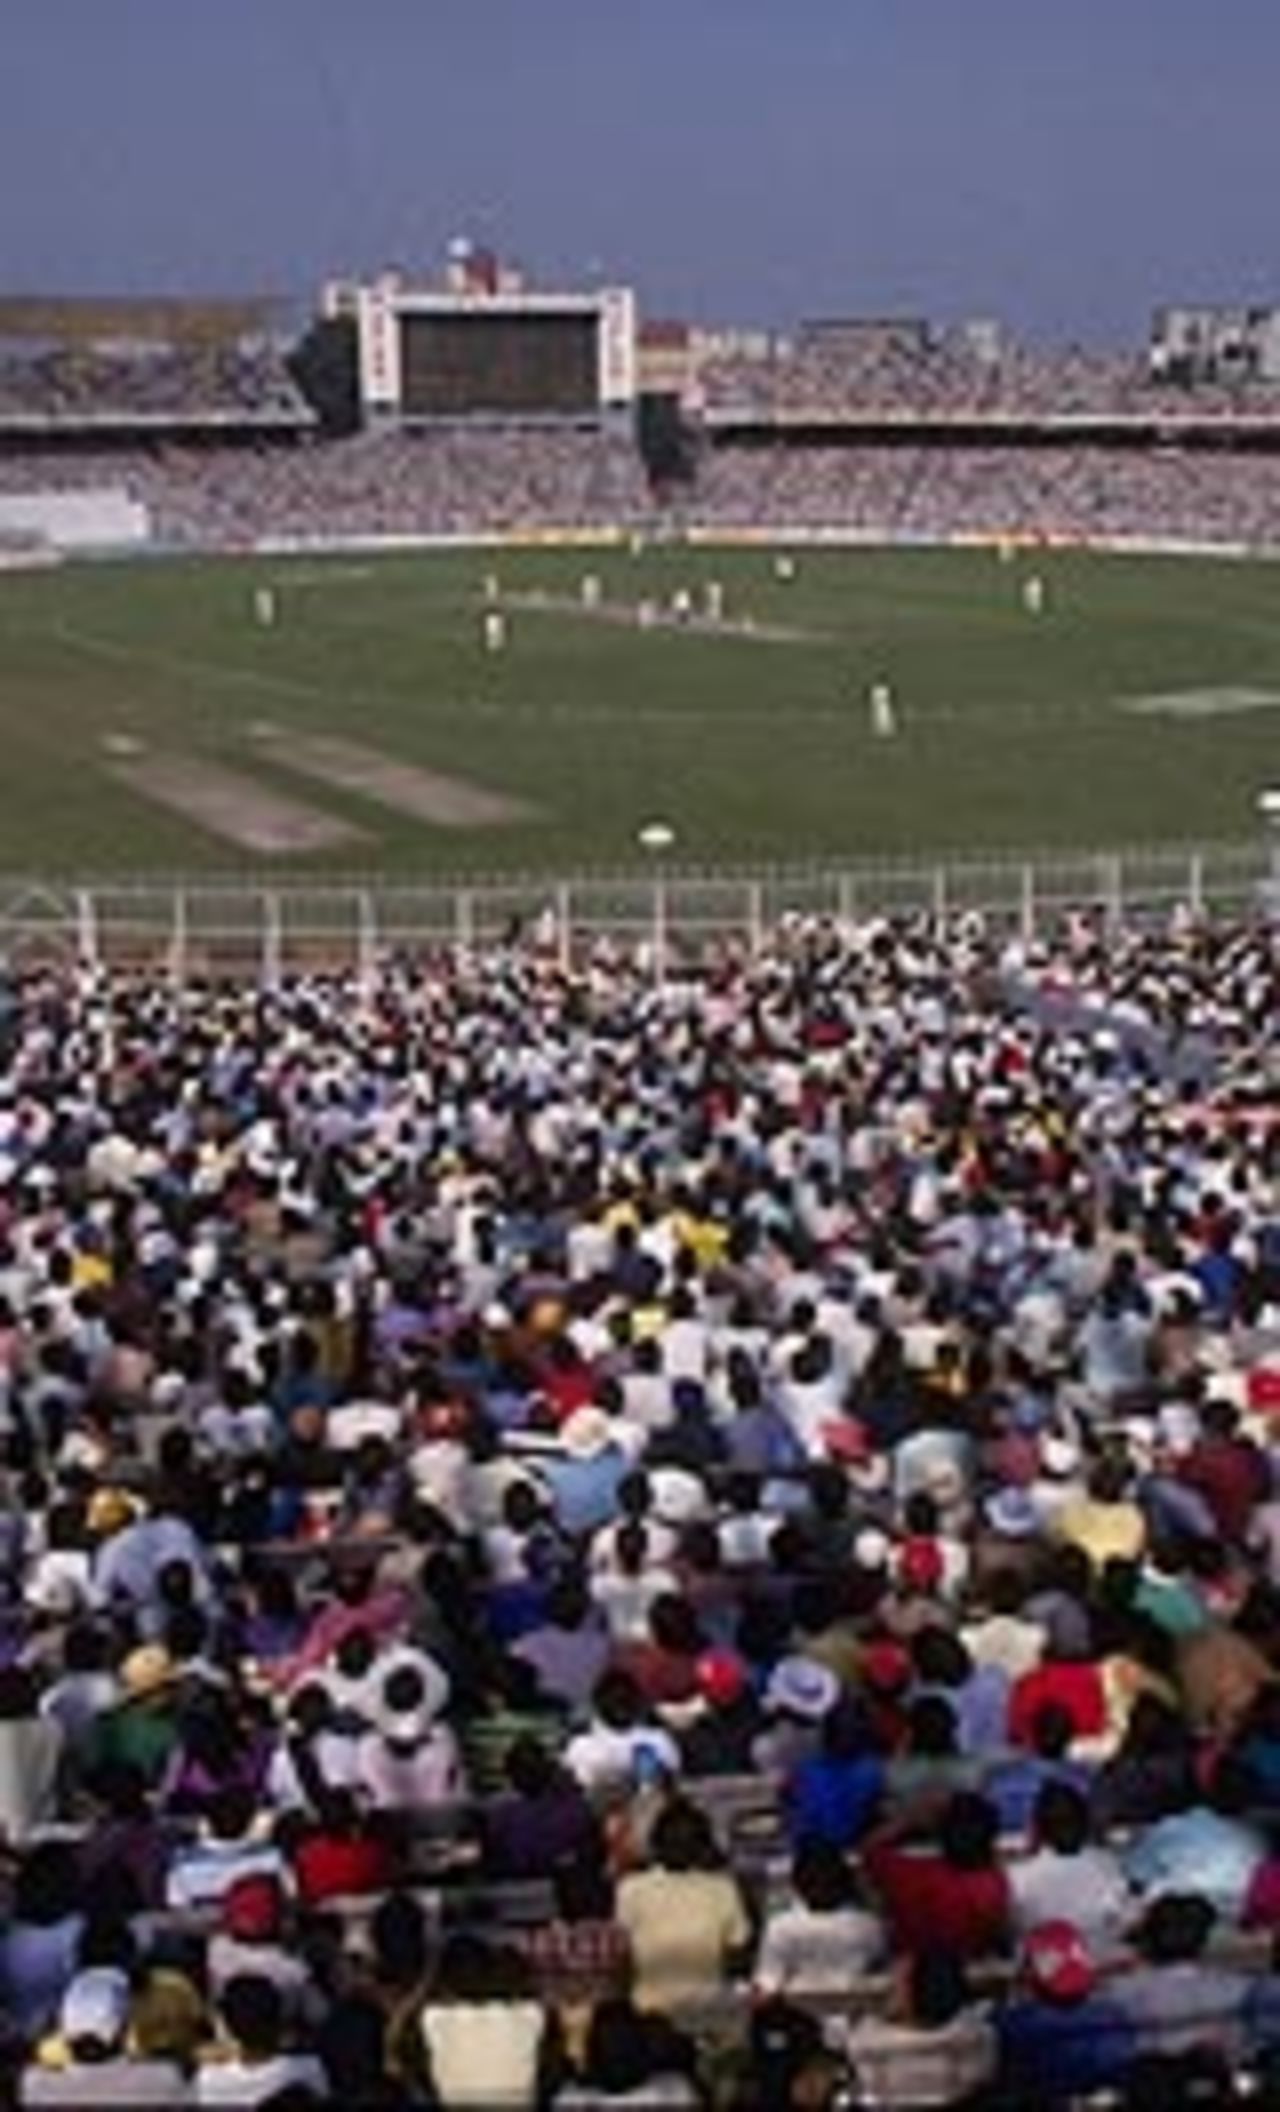 The crowd at the Eden Gardens during South Africa's one-dayer against India in 1991, India v South Africa, 1st ODI, Kolkata, November 10, 1991